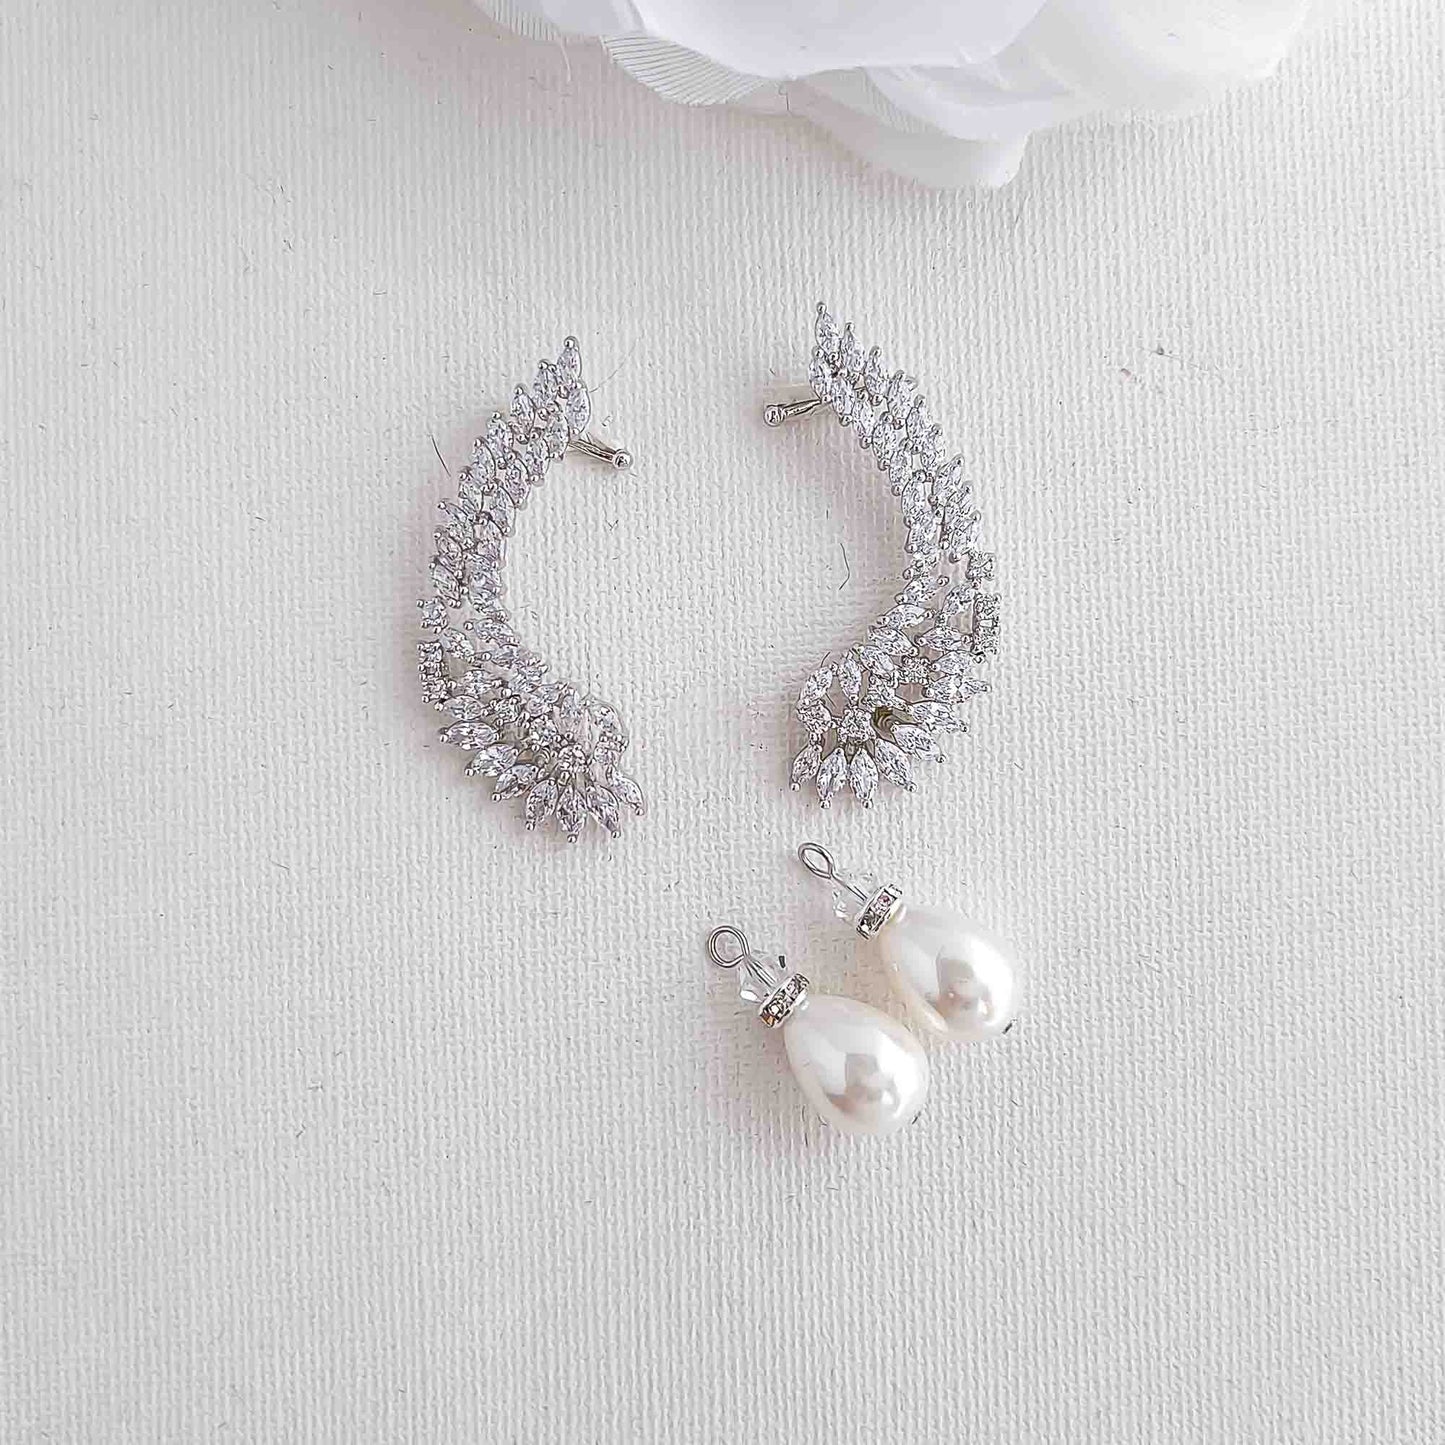 Ear Cuffs With or Without Pearl Drop-Adena